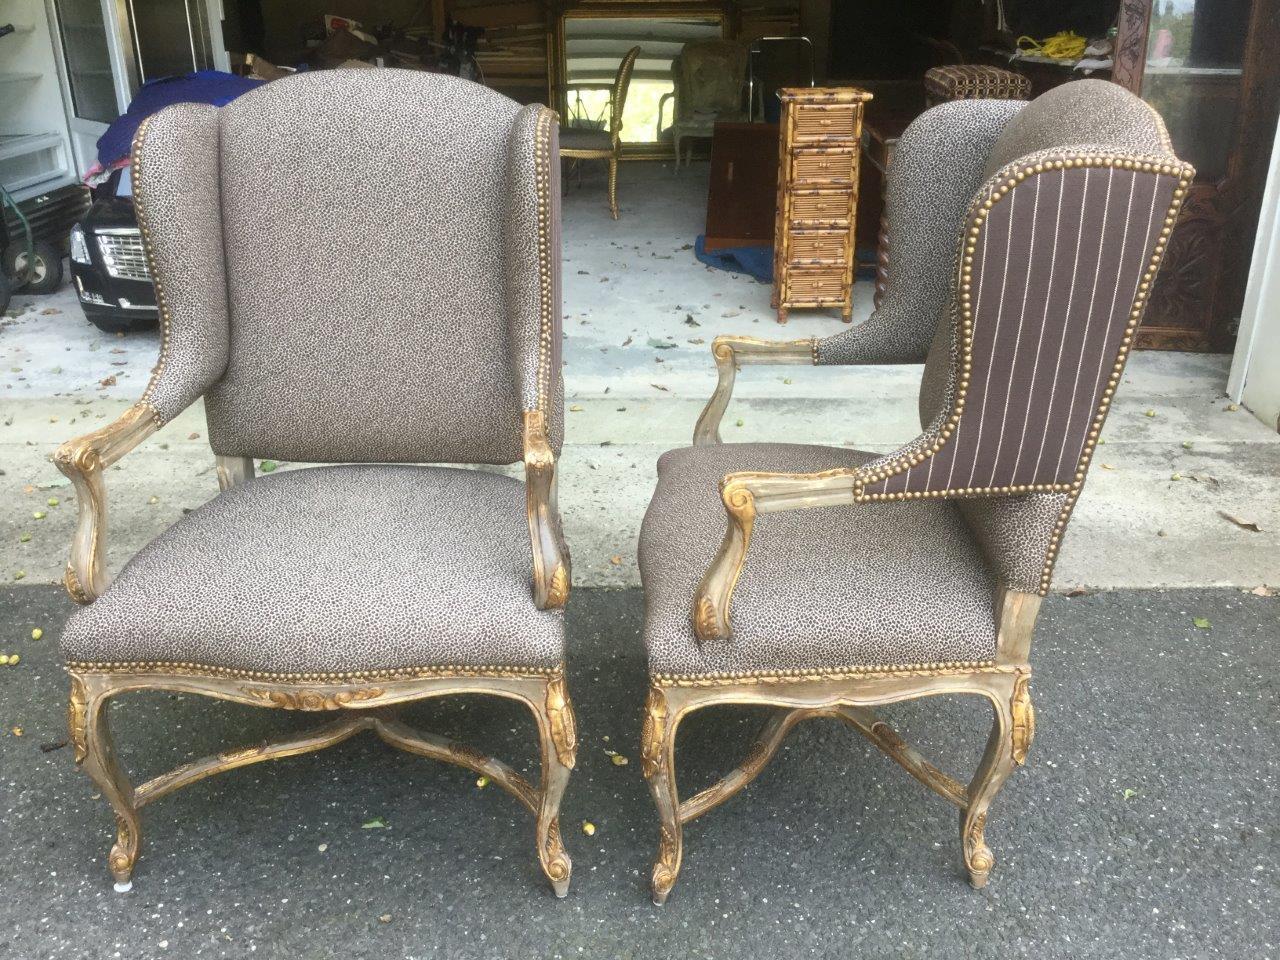 North American Glam Pair of Silver Painted French Wingback Chairs with Cheetah Upholstery For Sale